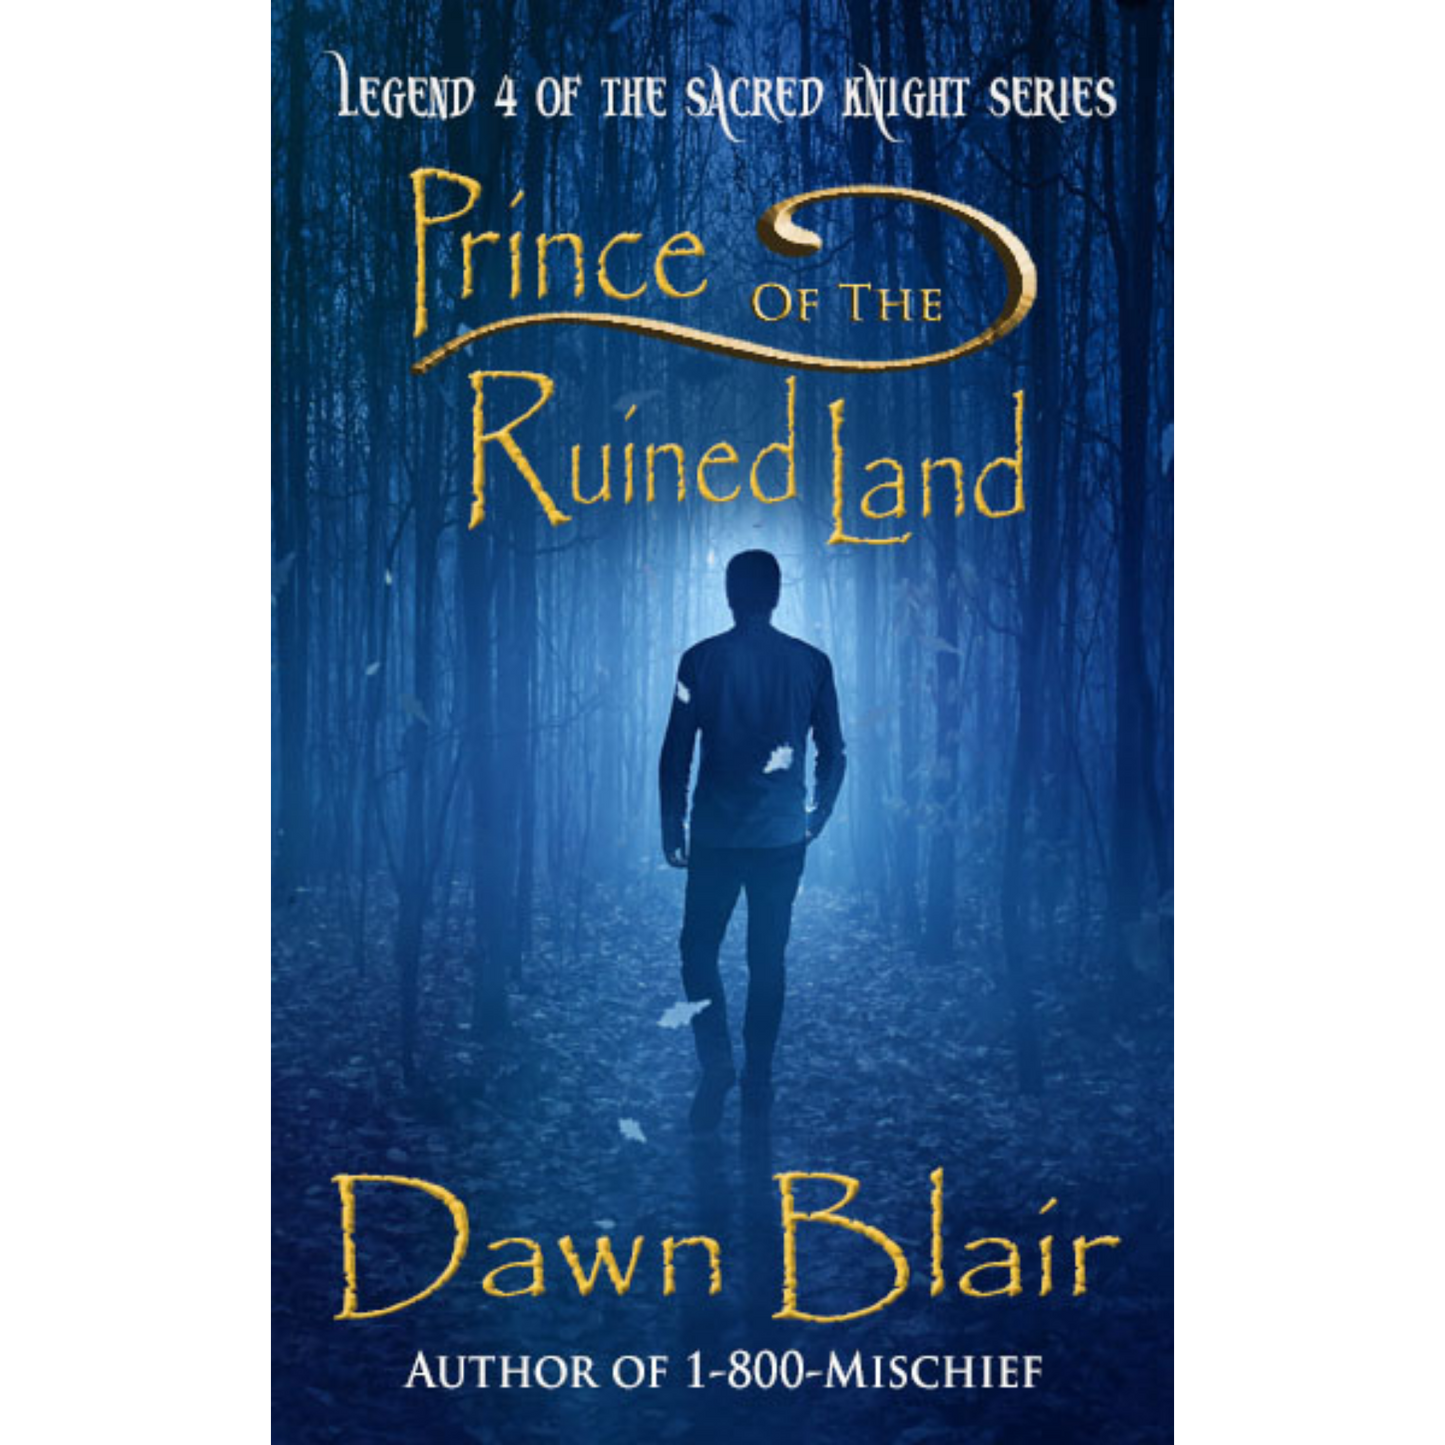 Prince of the Ruined Land (Legend 4 of the Sacred Knight series)